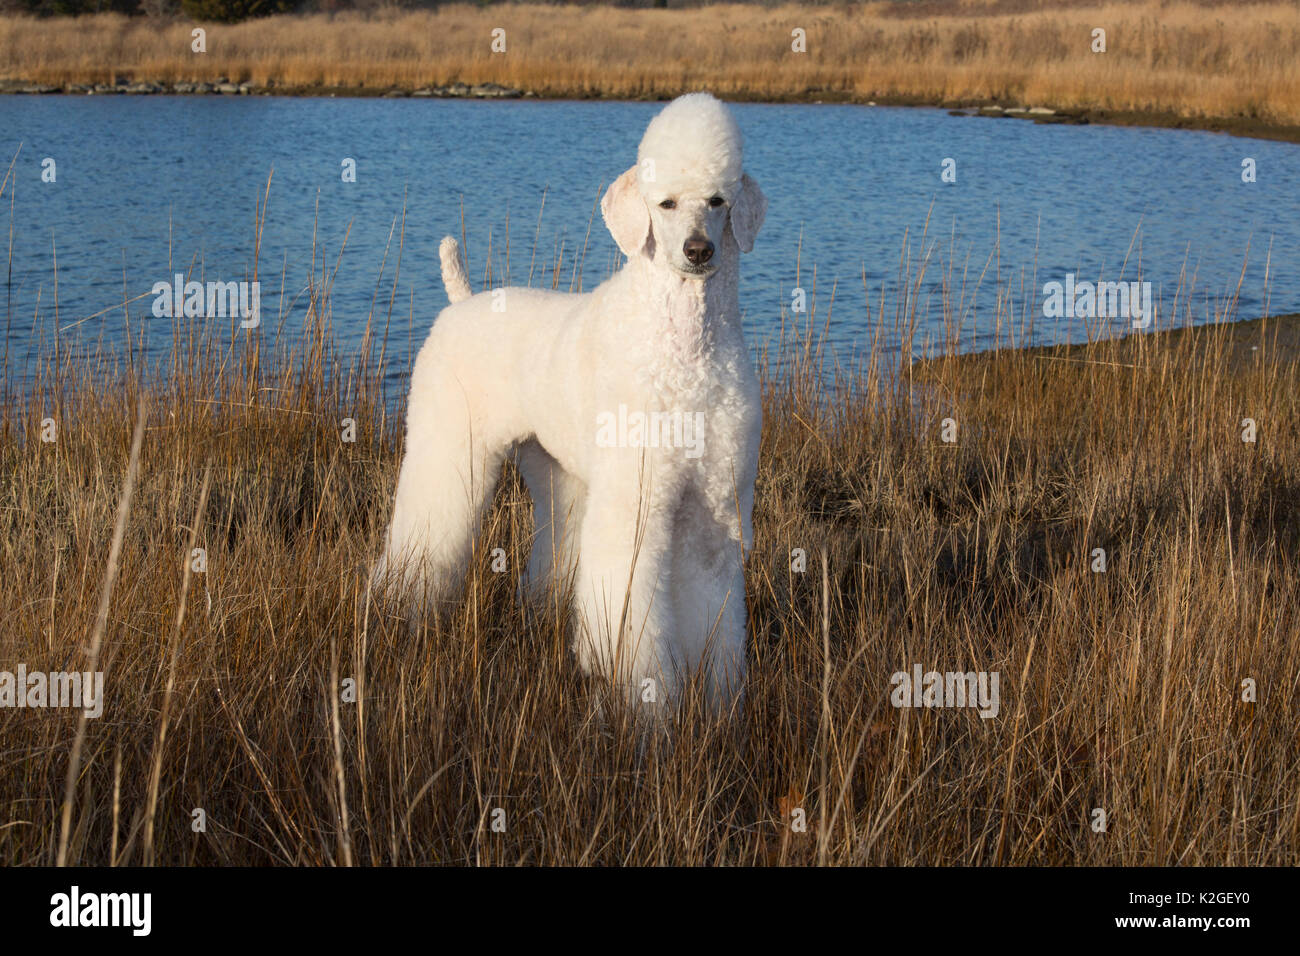 Standard Poodle in Salt Marsh, Waterford, Connecticut, USA Stockfoto